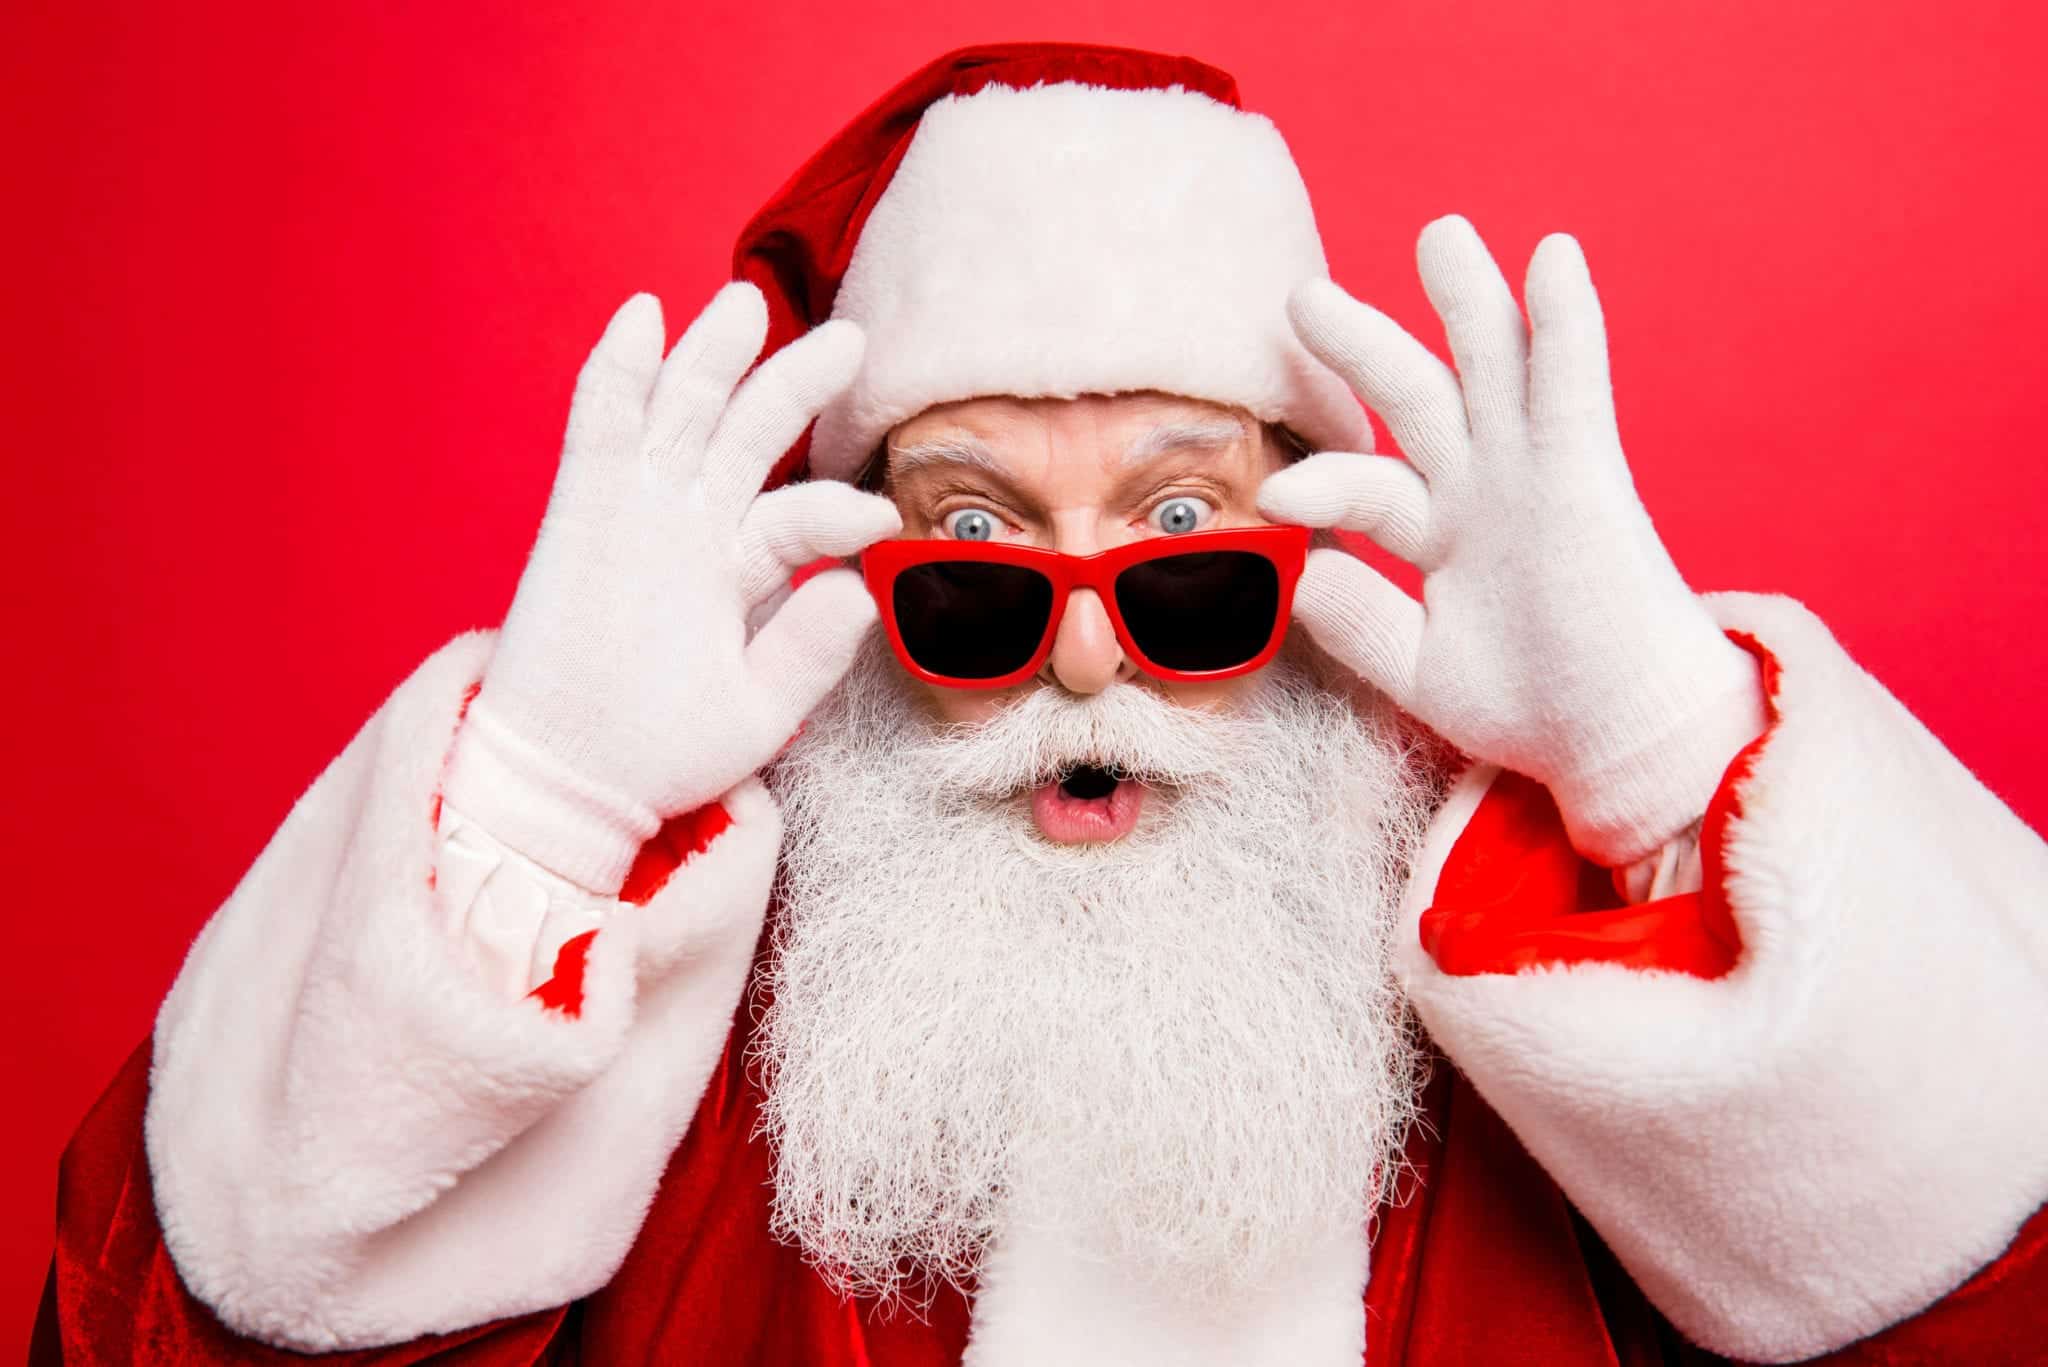 Registered Sex Offender Dressed as Santa - But What Was His Crime?